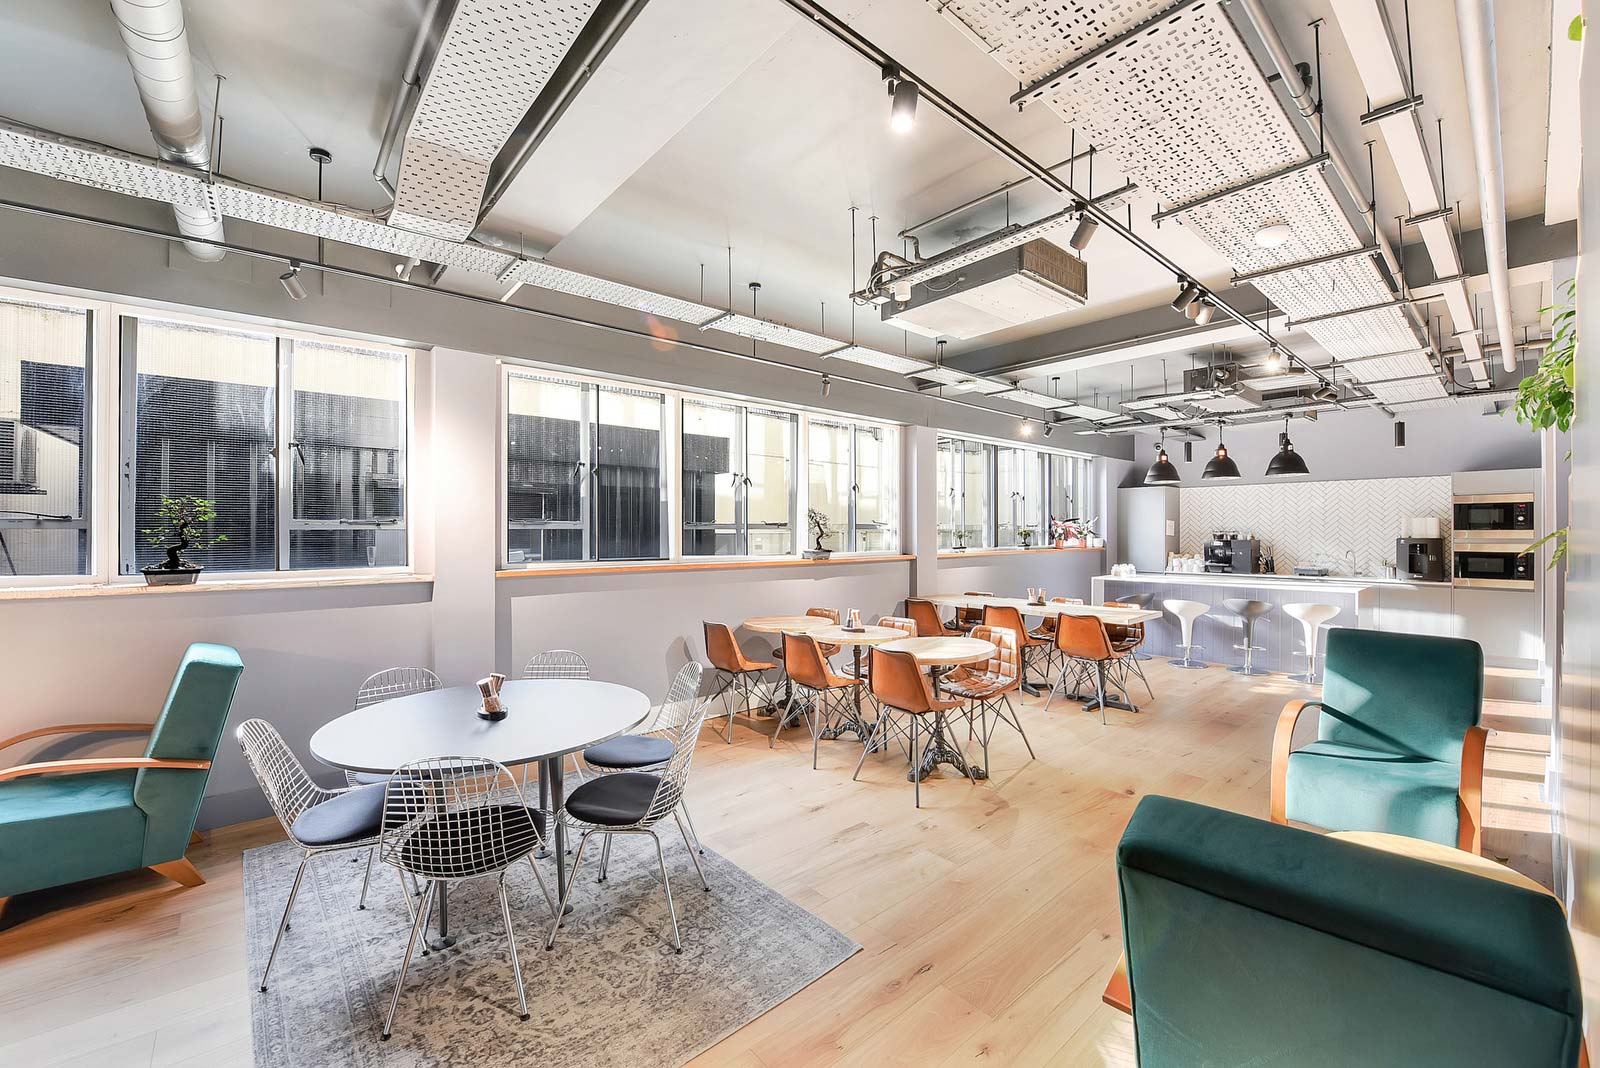 Finding managed offices for rent in London - What makes a great managed office?